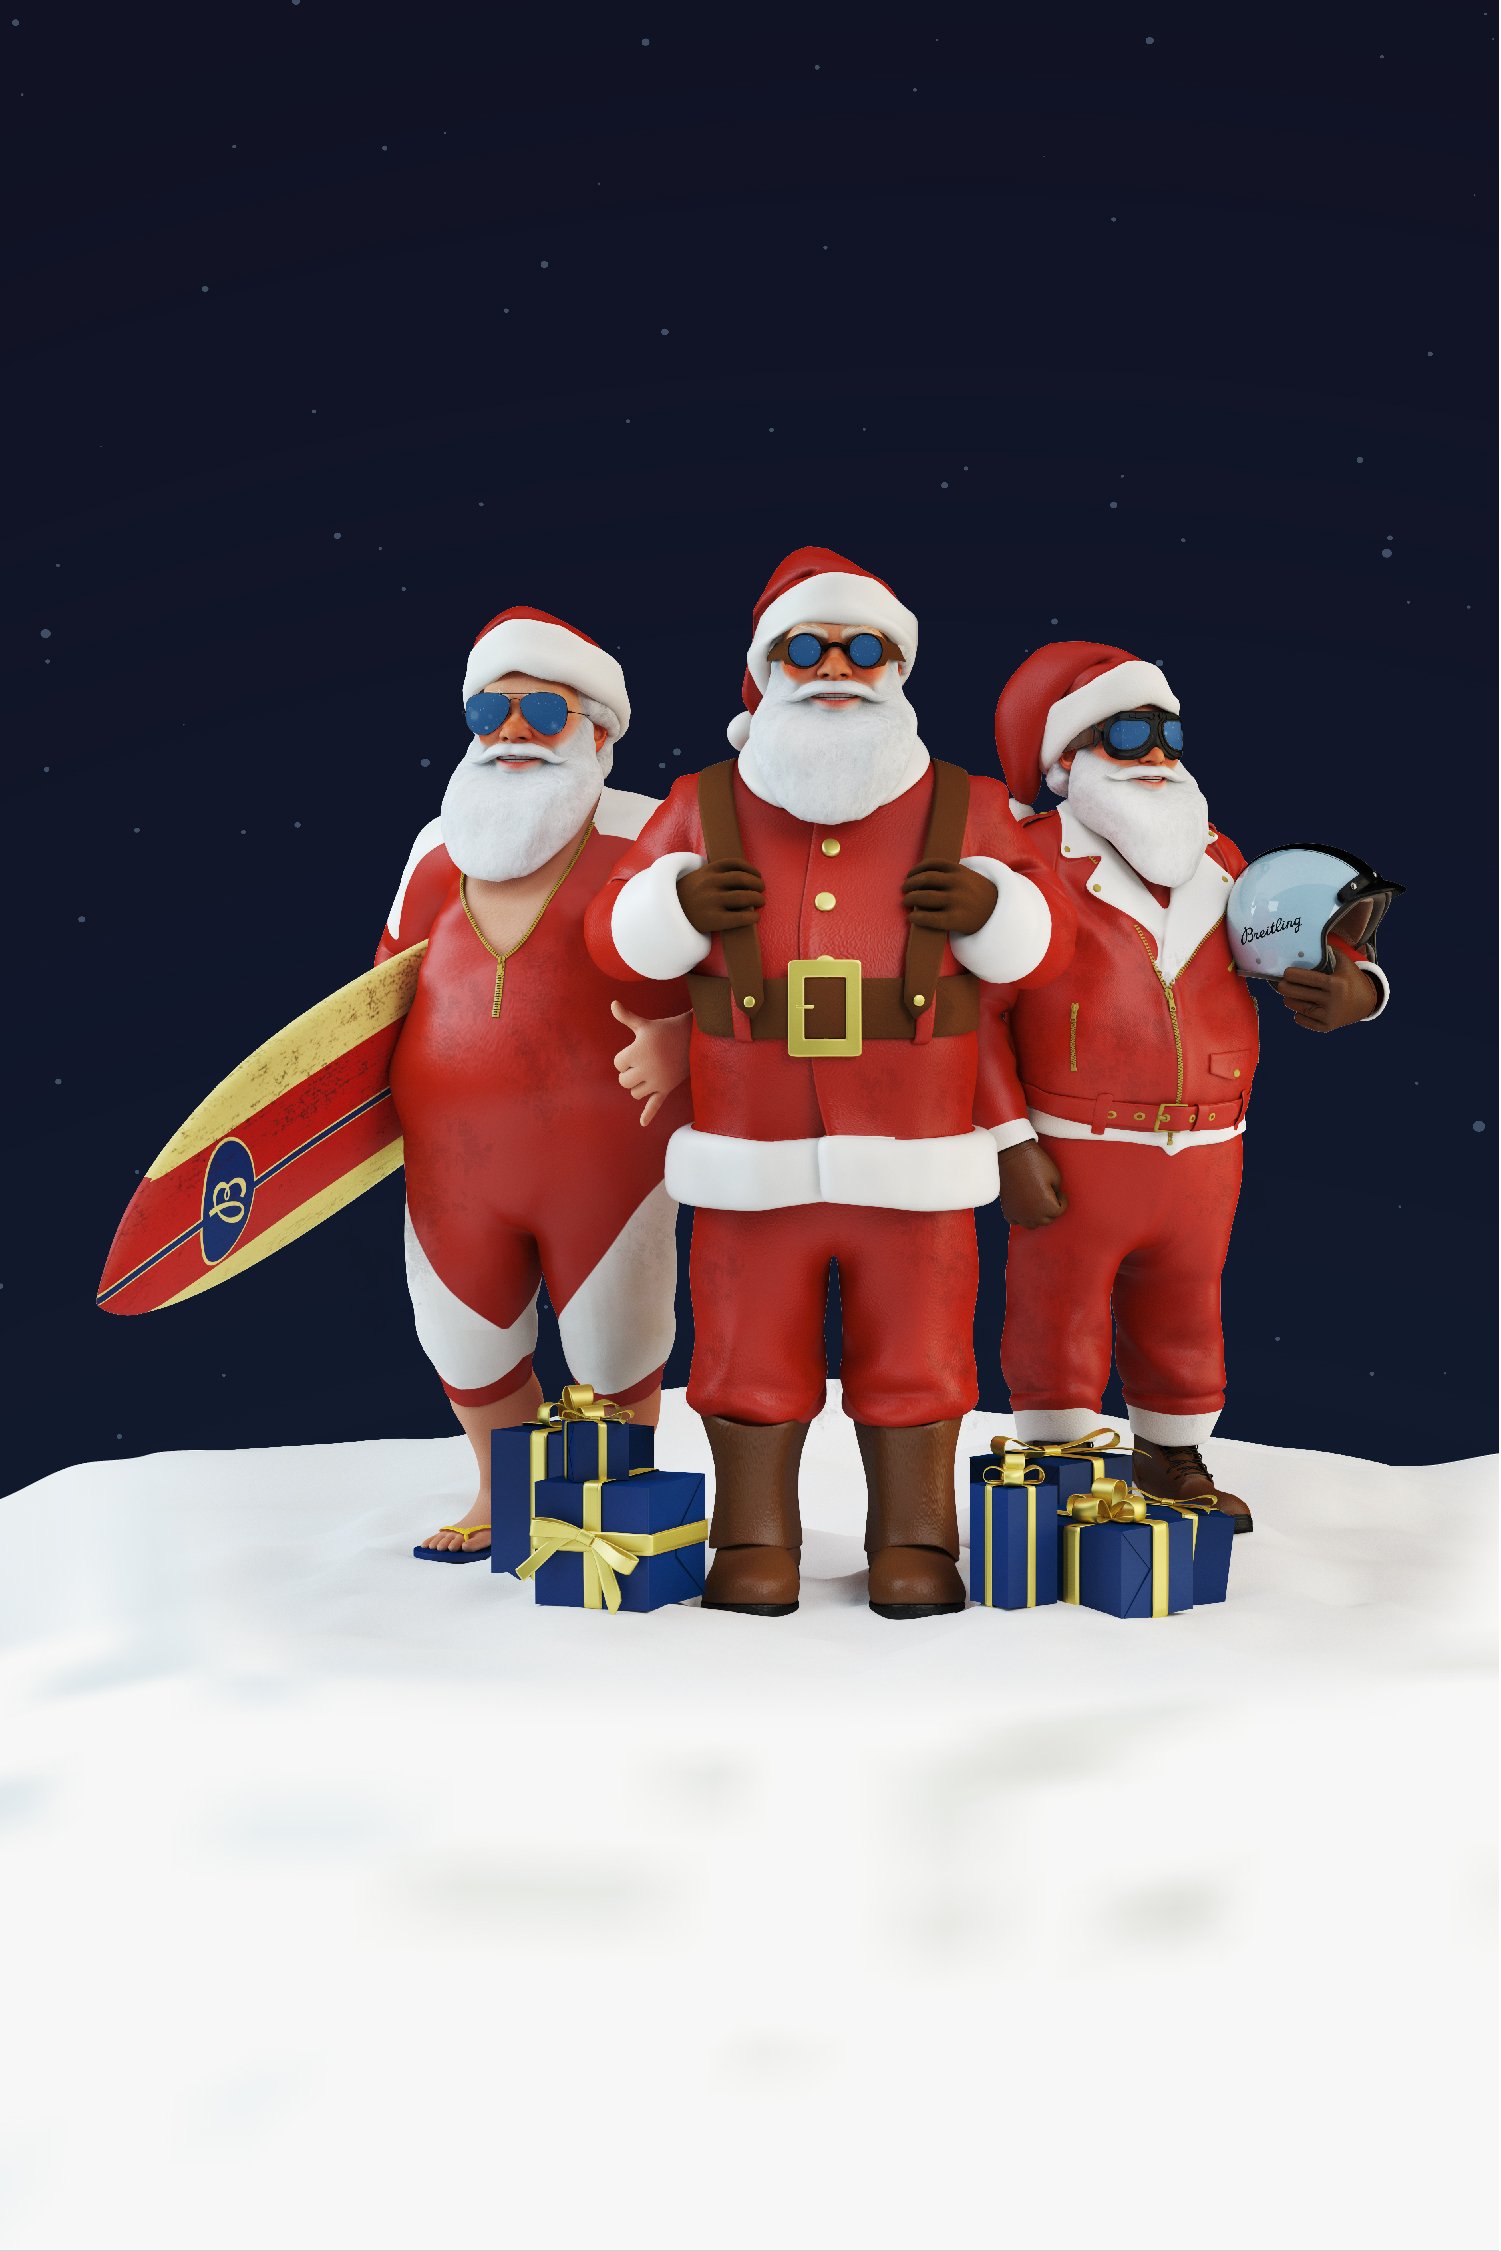 YOU ARE NOT TOO LATE FOR HOLIDAY GIFTS! SENDING BREITLING WITH 4GIFT MAKES GIVING EASIER THAN EVER